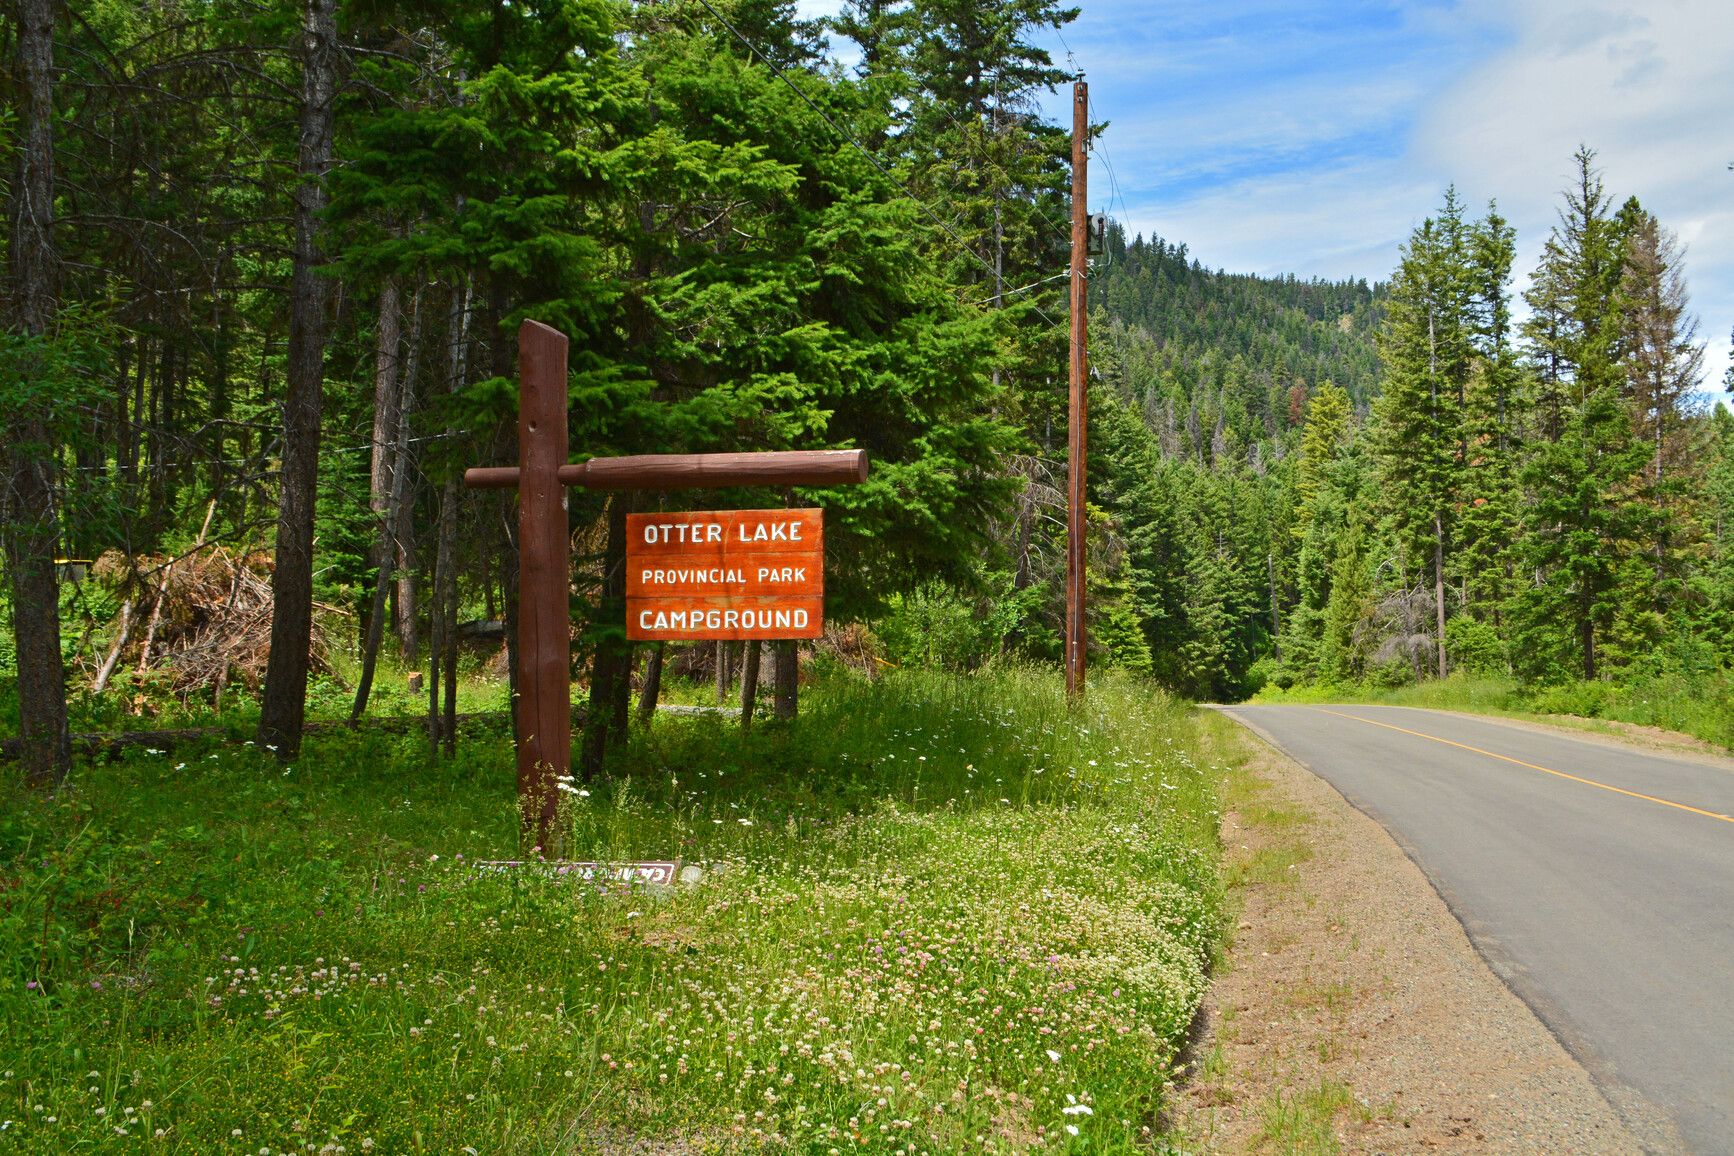 Welcome sign for Otter Lake Park.